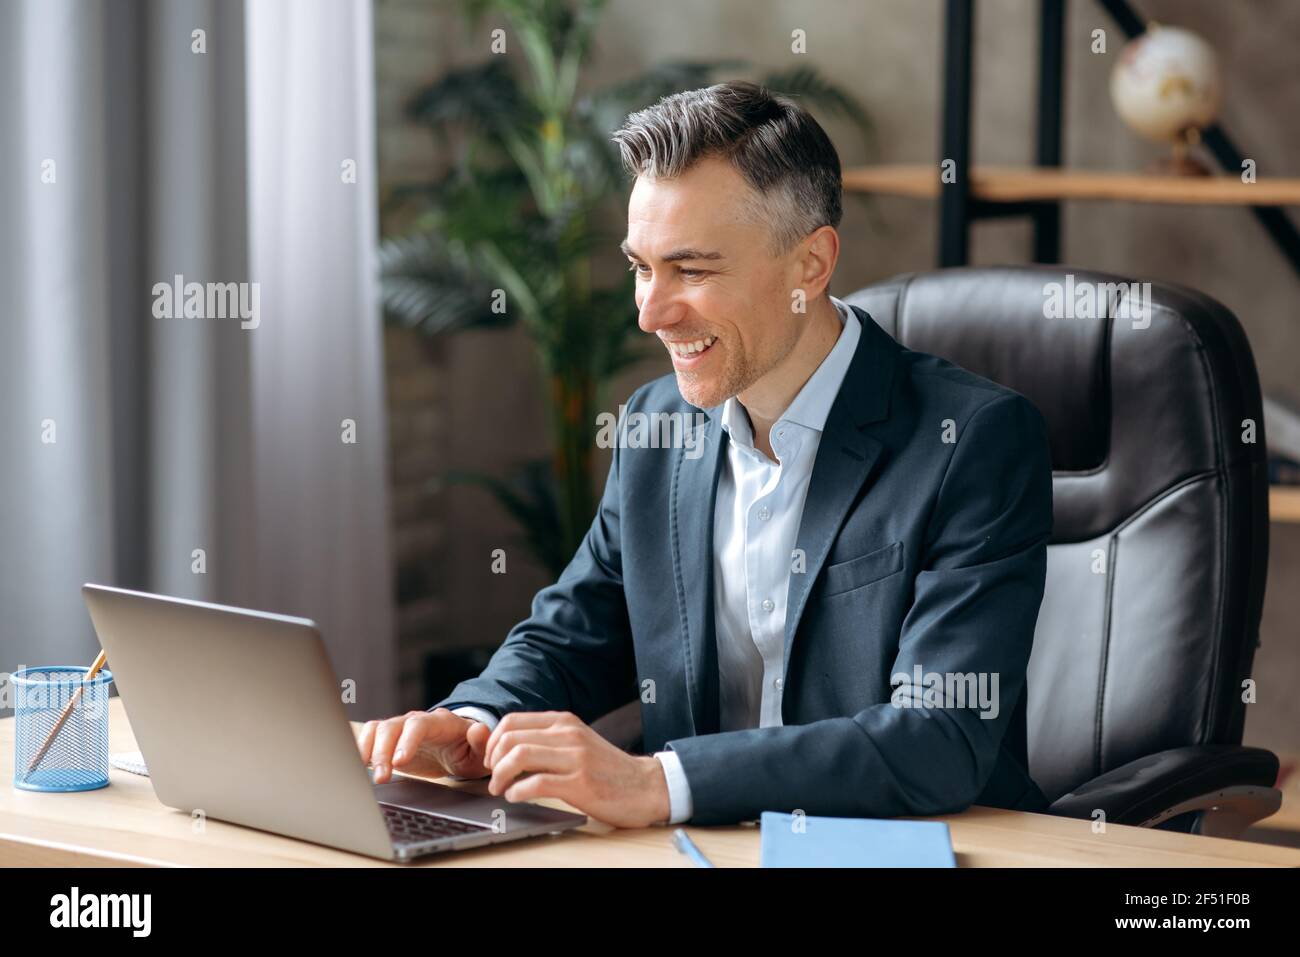 Influential successful Caucasian adult businessman or manager in a formal suit uses a laptop, communicates via video conferencing, online meetings, sits office, types on a keyboard, smiles friendly Stock Photo